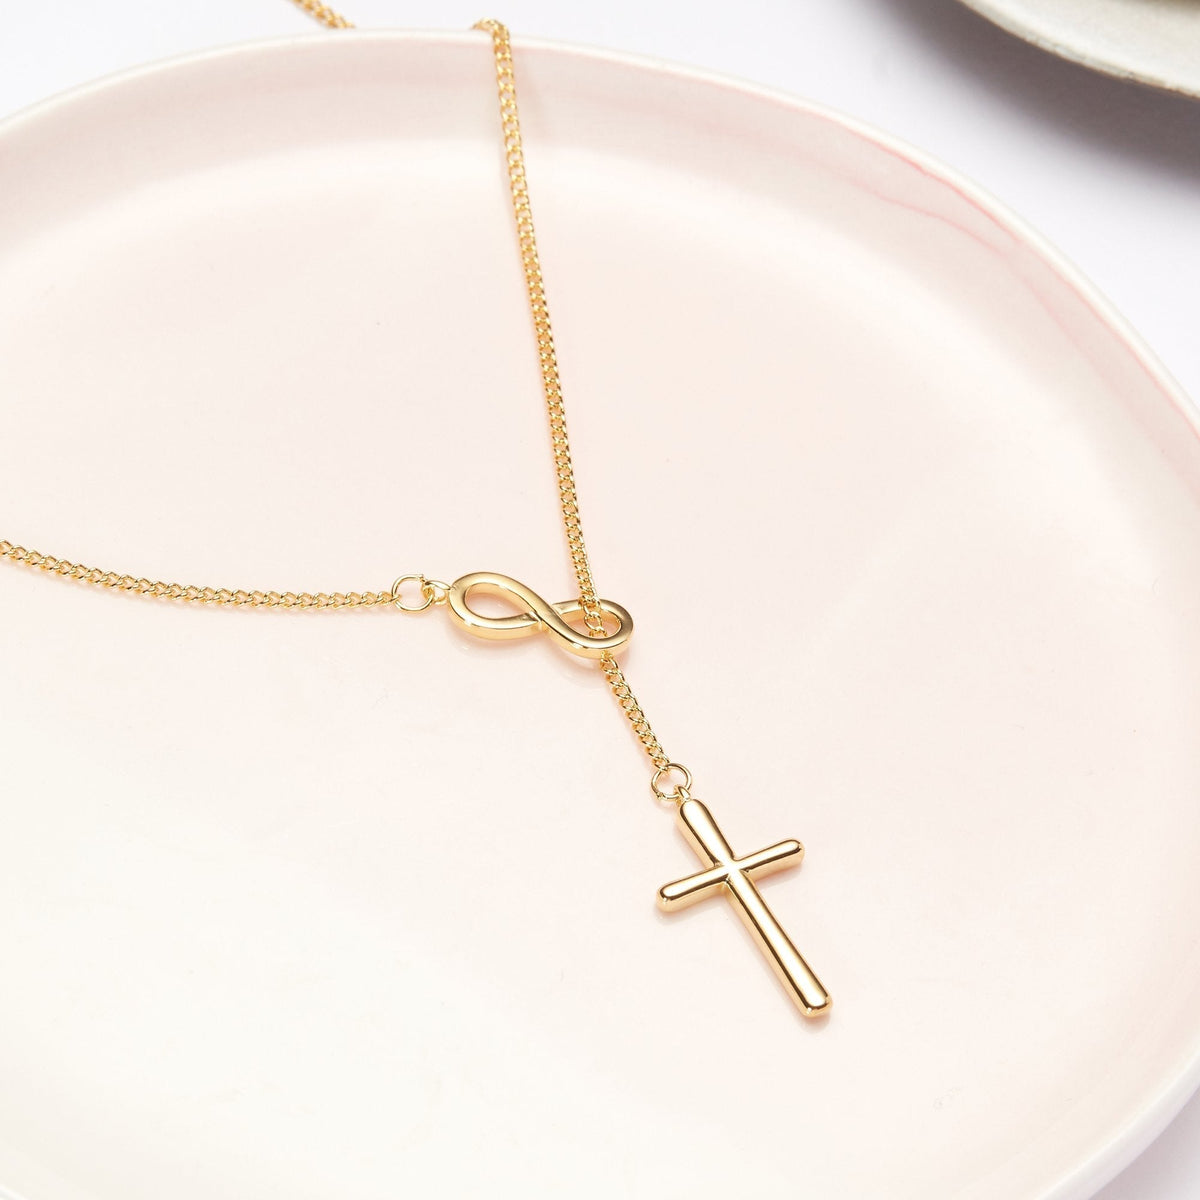 First Communion Necklace